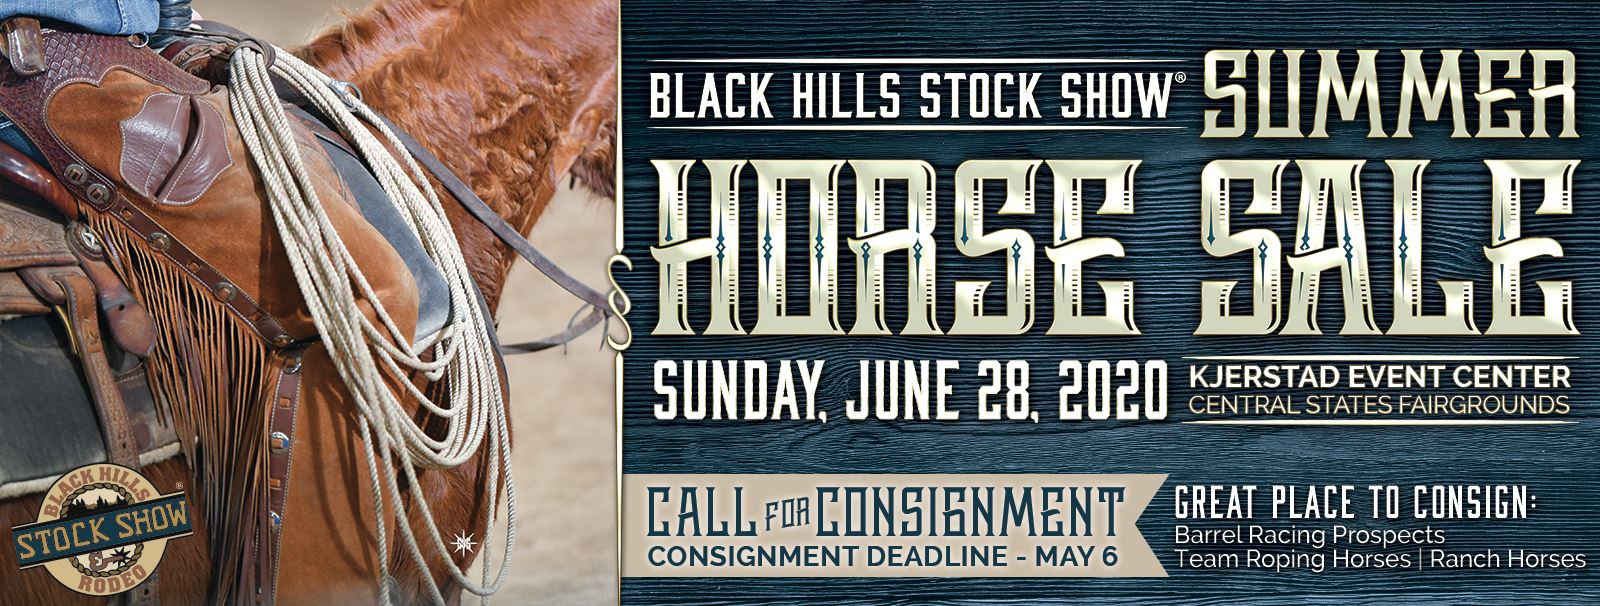 2021 Black Hills Stock Show and Rodeo